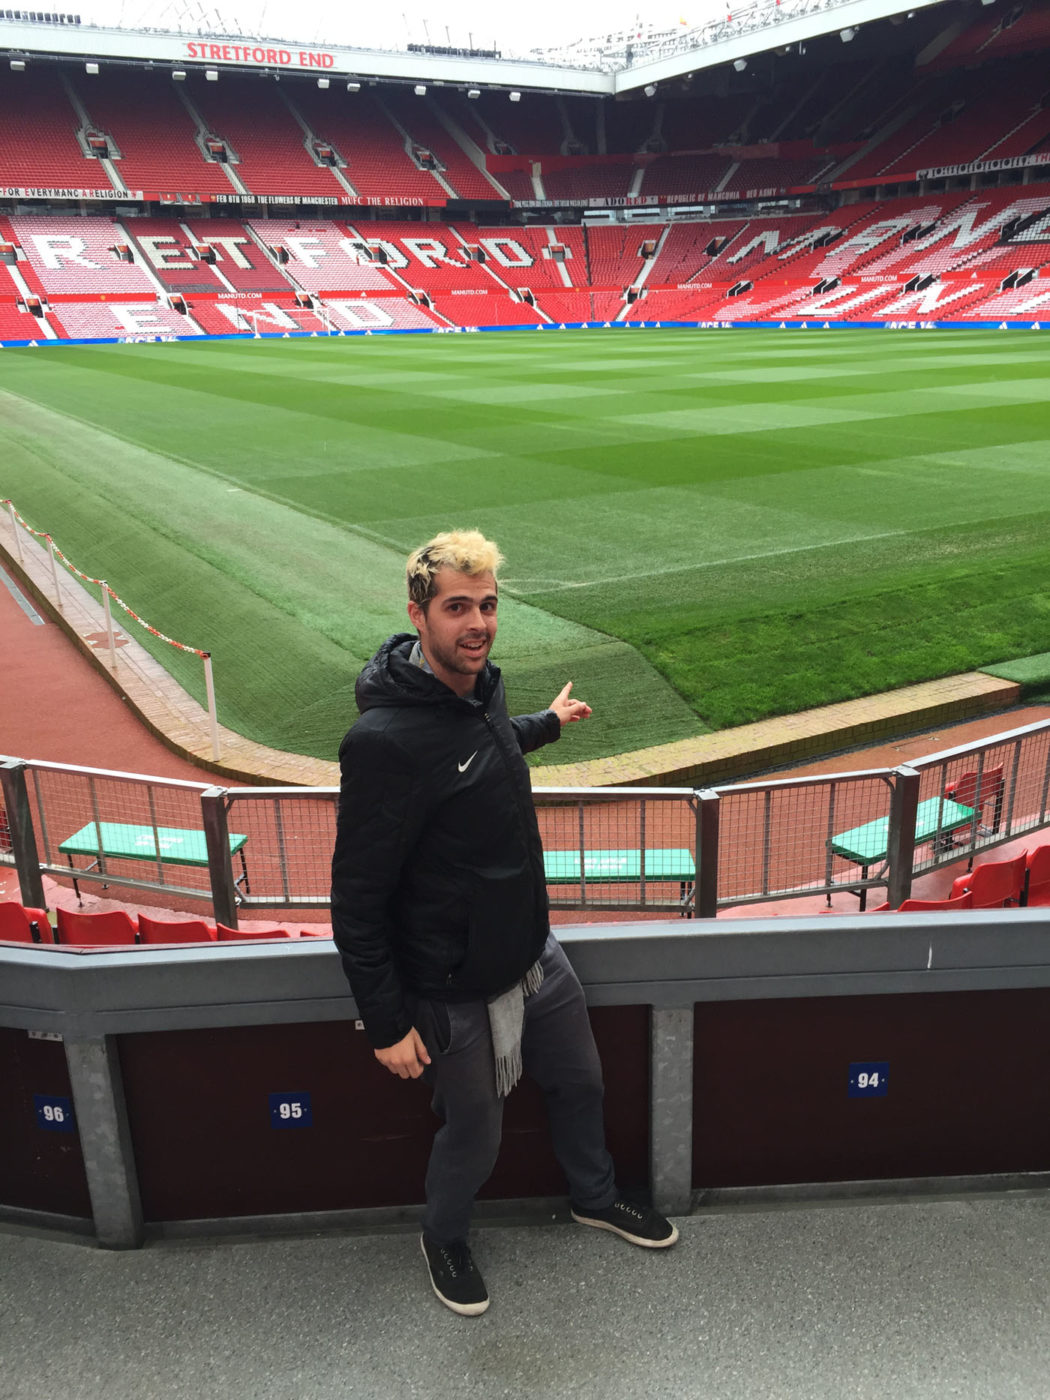 Ian Mullen's photo of himself at Old Trafford soccer field, home of Manchester United.